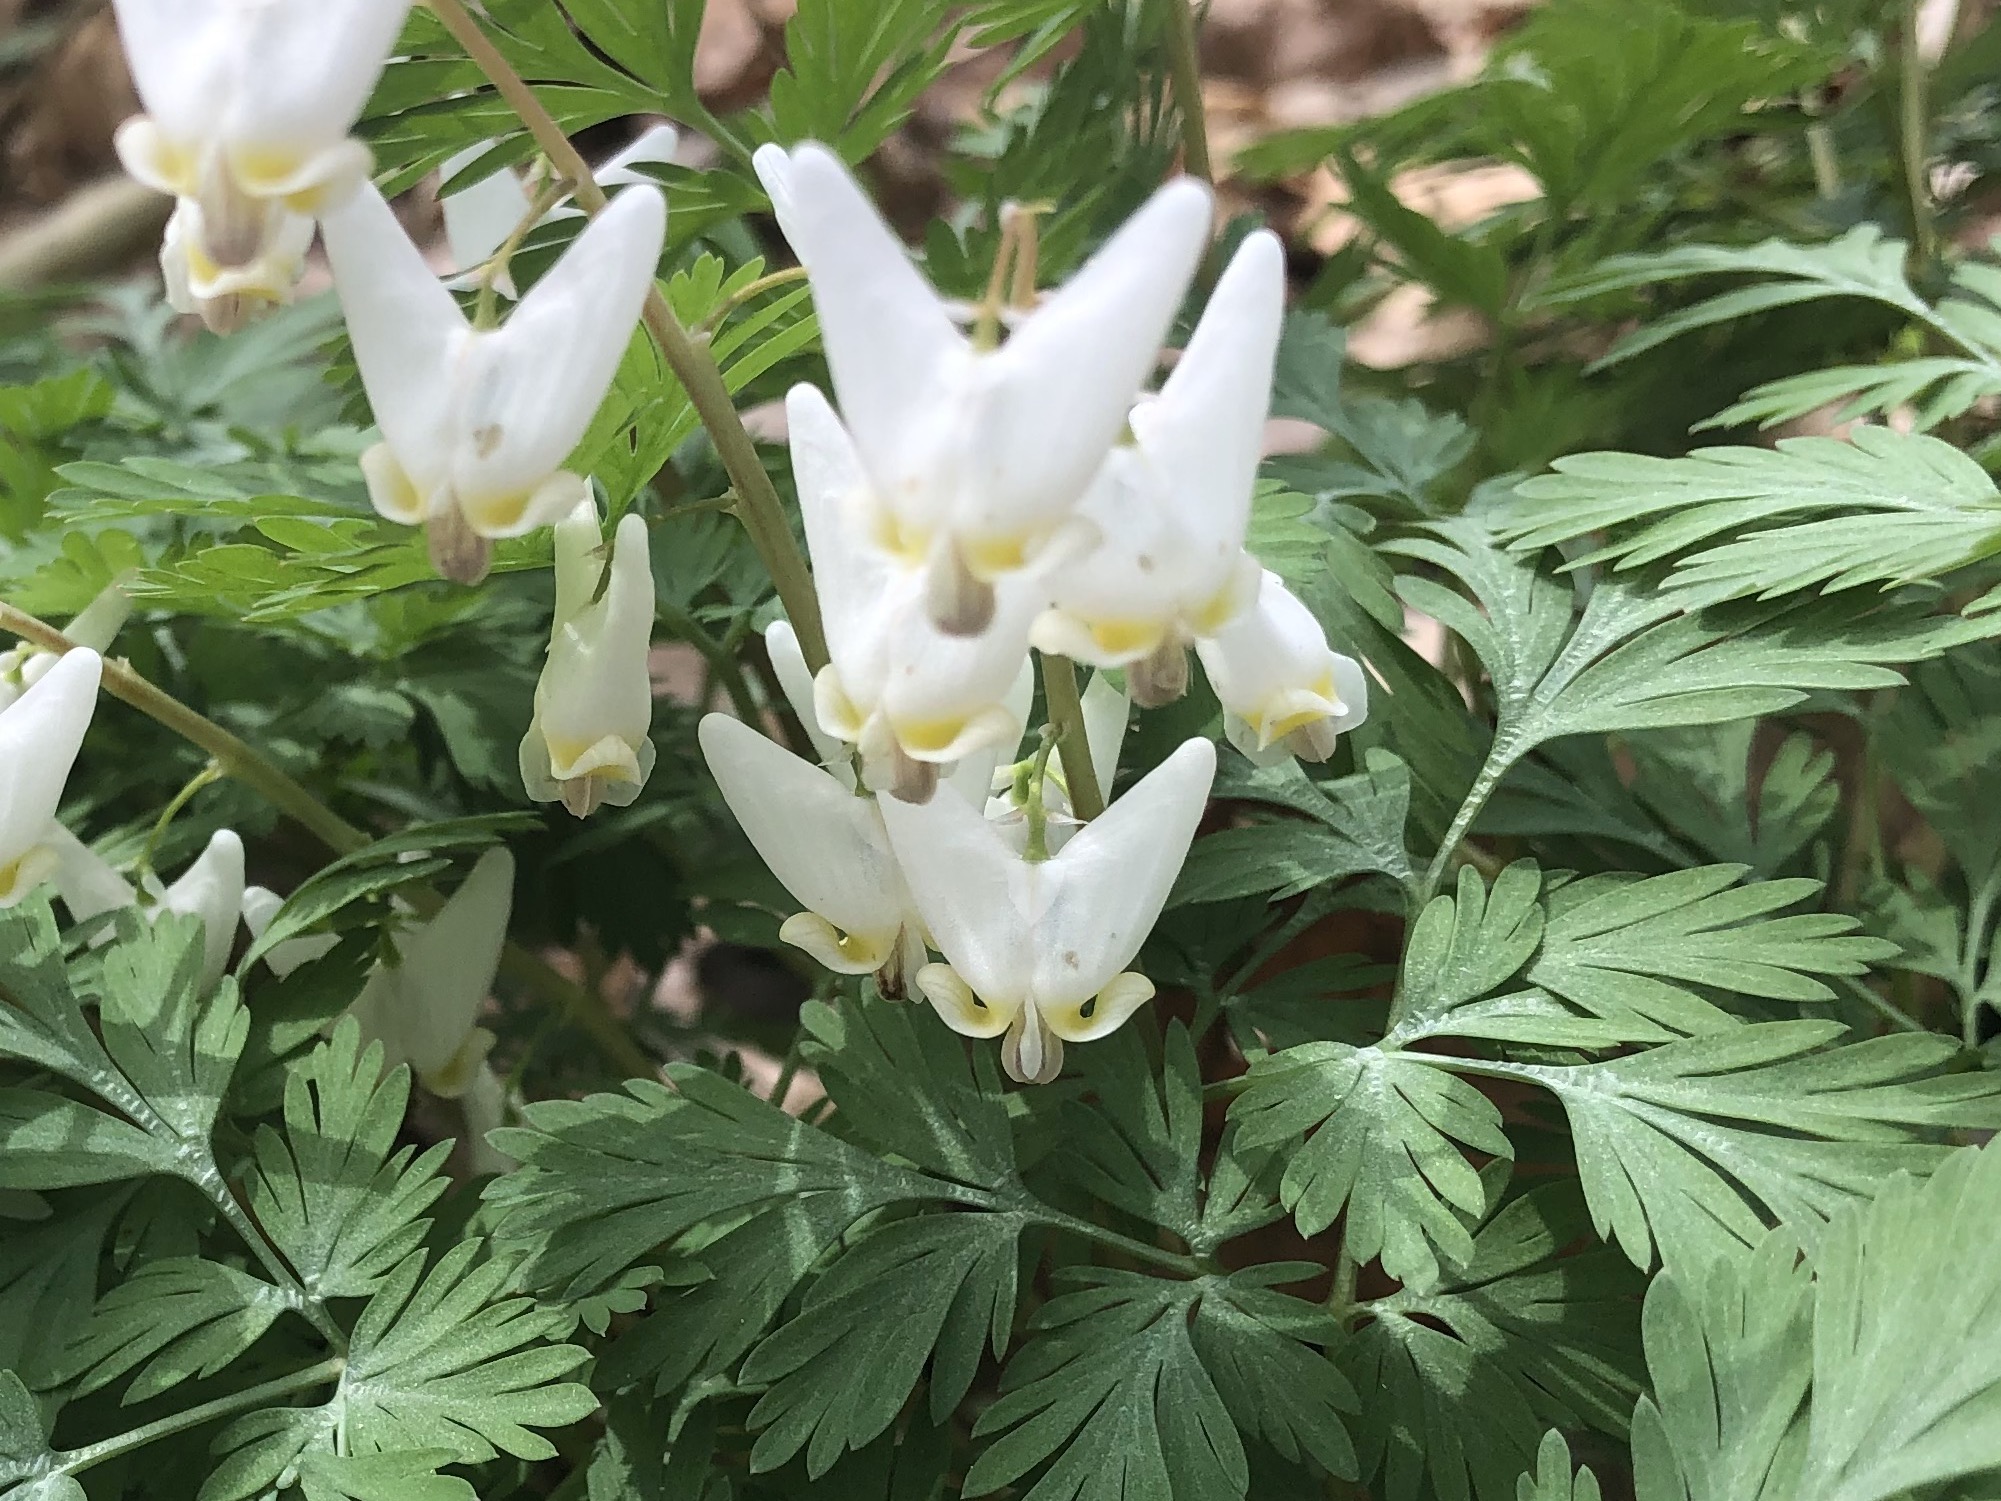 Dutchman's Breeches in the Maple-Basswood Forest of the University of Wisconsin Arboretum on May 4, 2020.